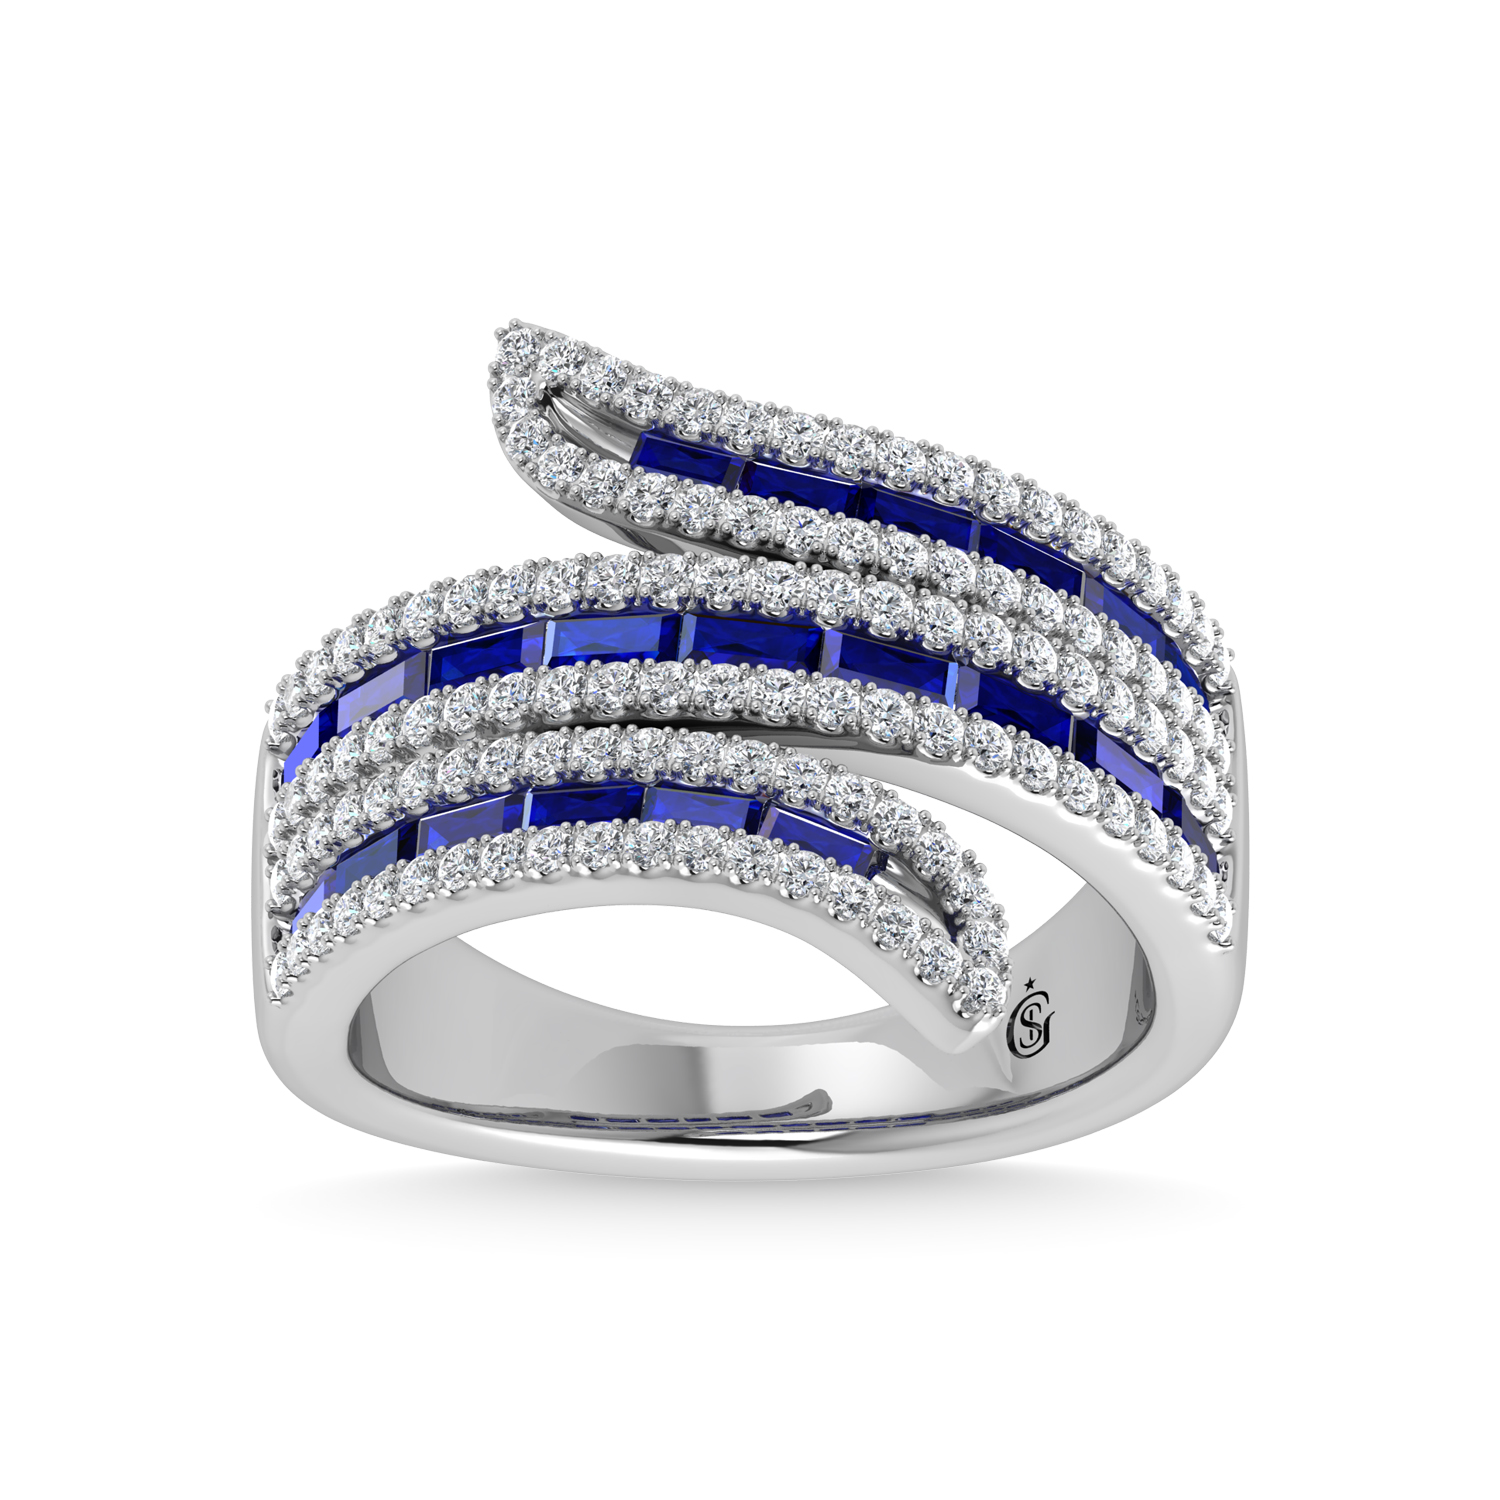 Fashion Rings Archives - Unclaimed Diamonds